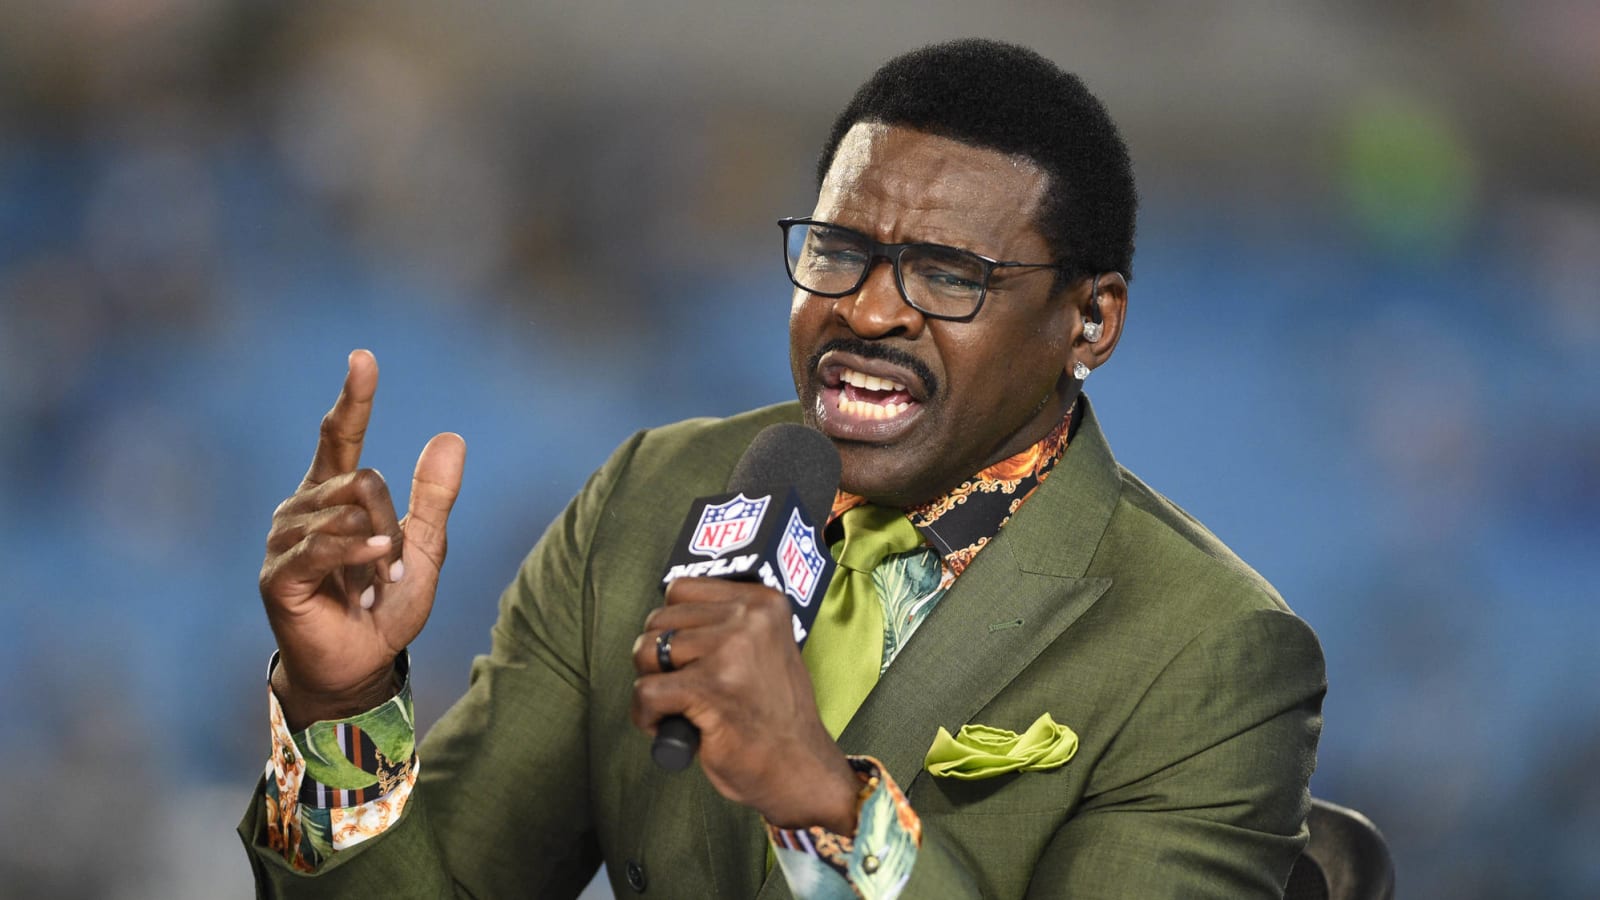 Michael Irvin shares tweet about Tom Brady at Hall of Fame